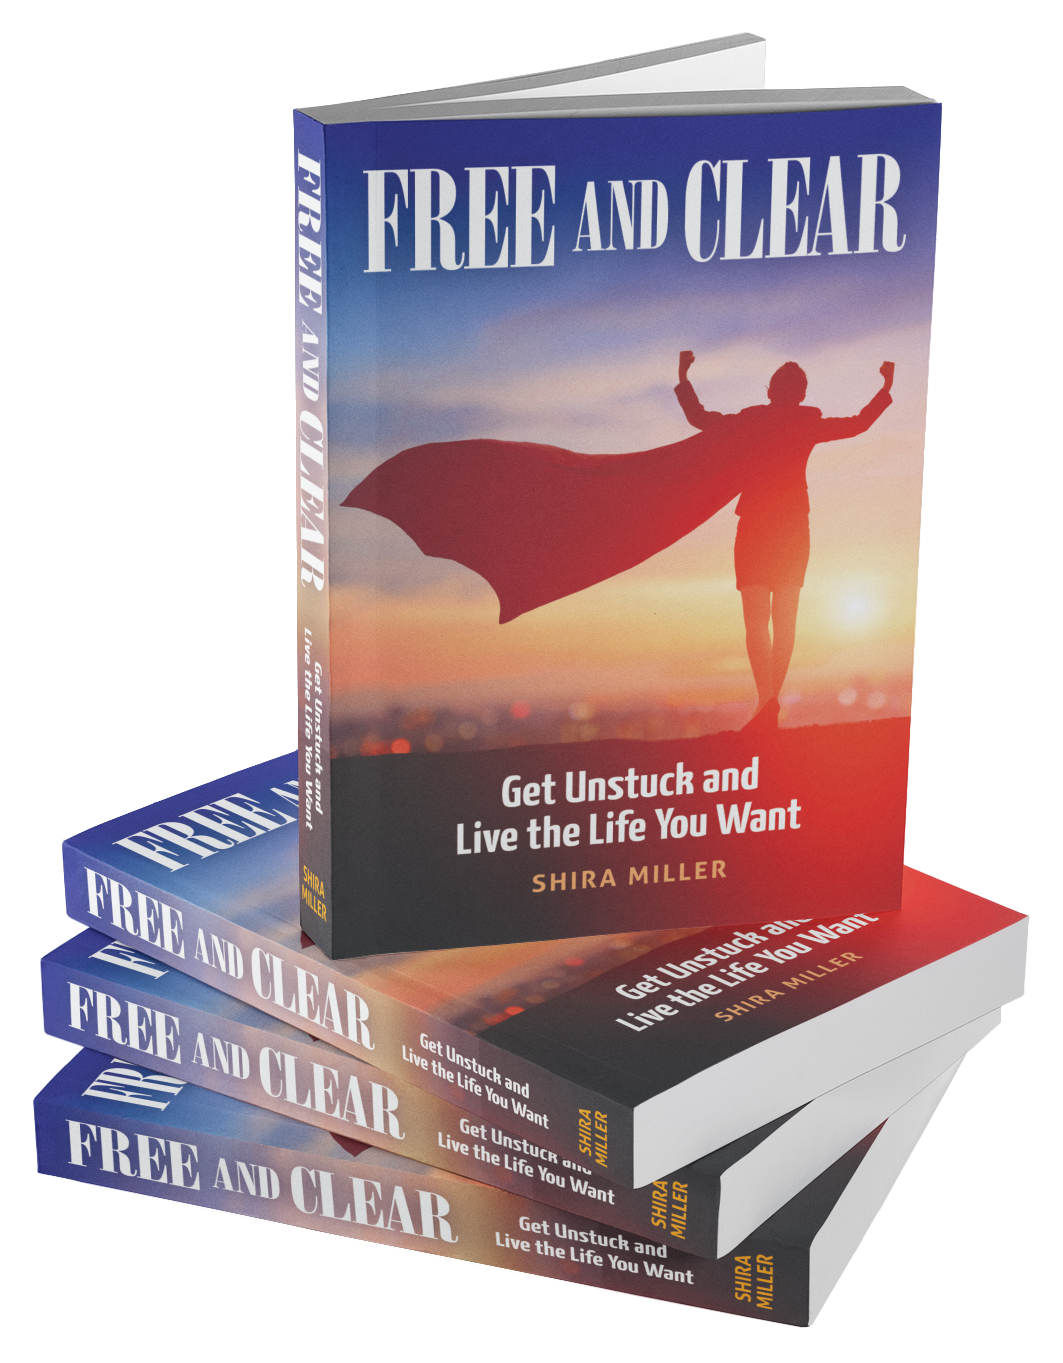 Free and Clear book mockup